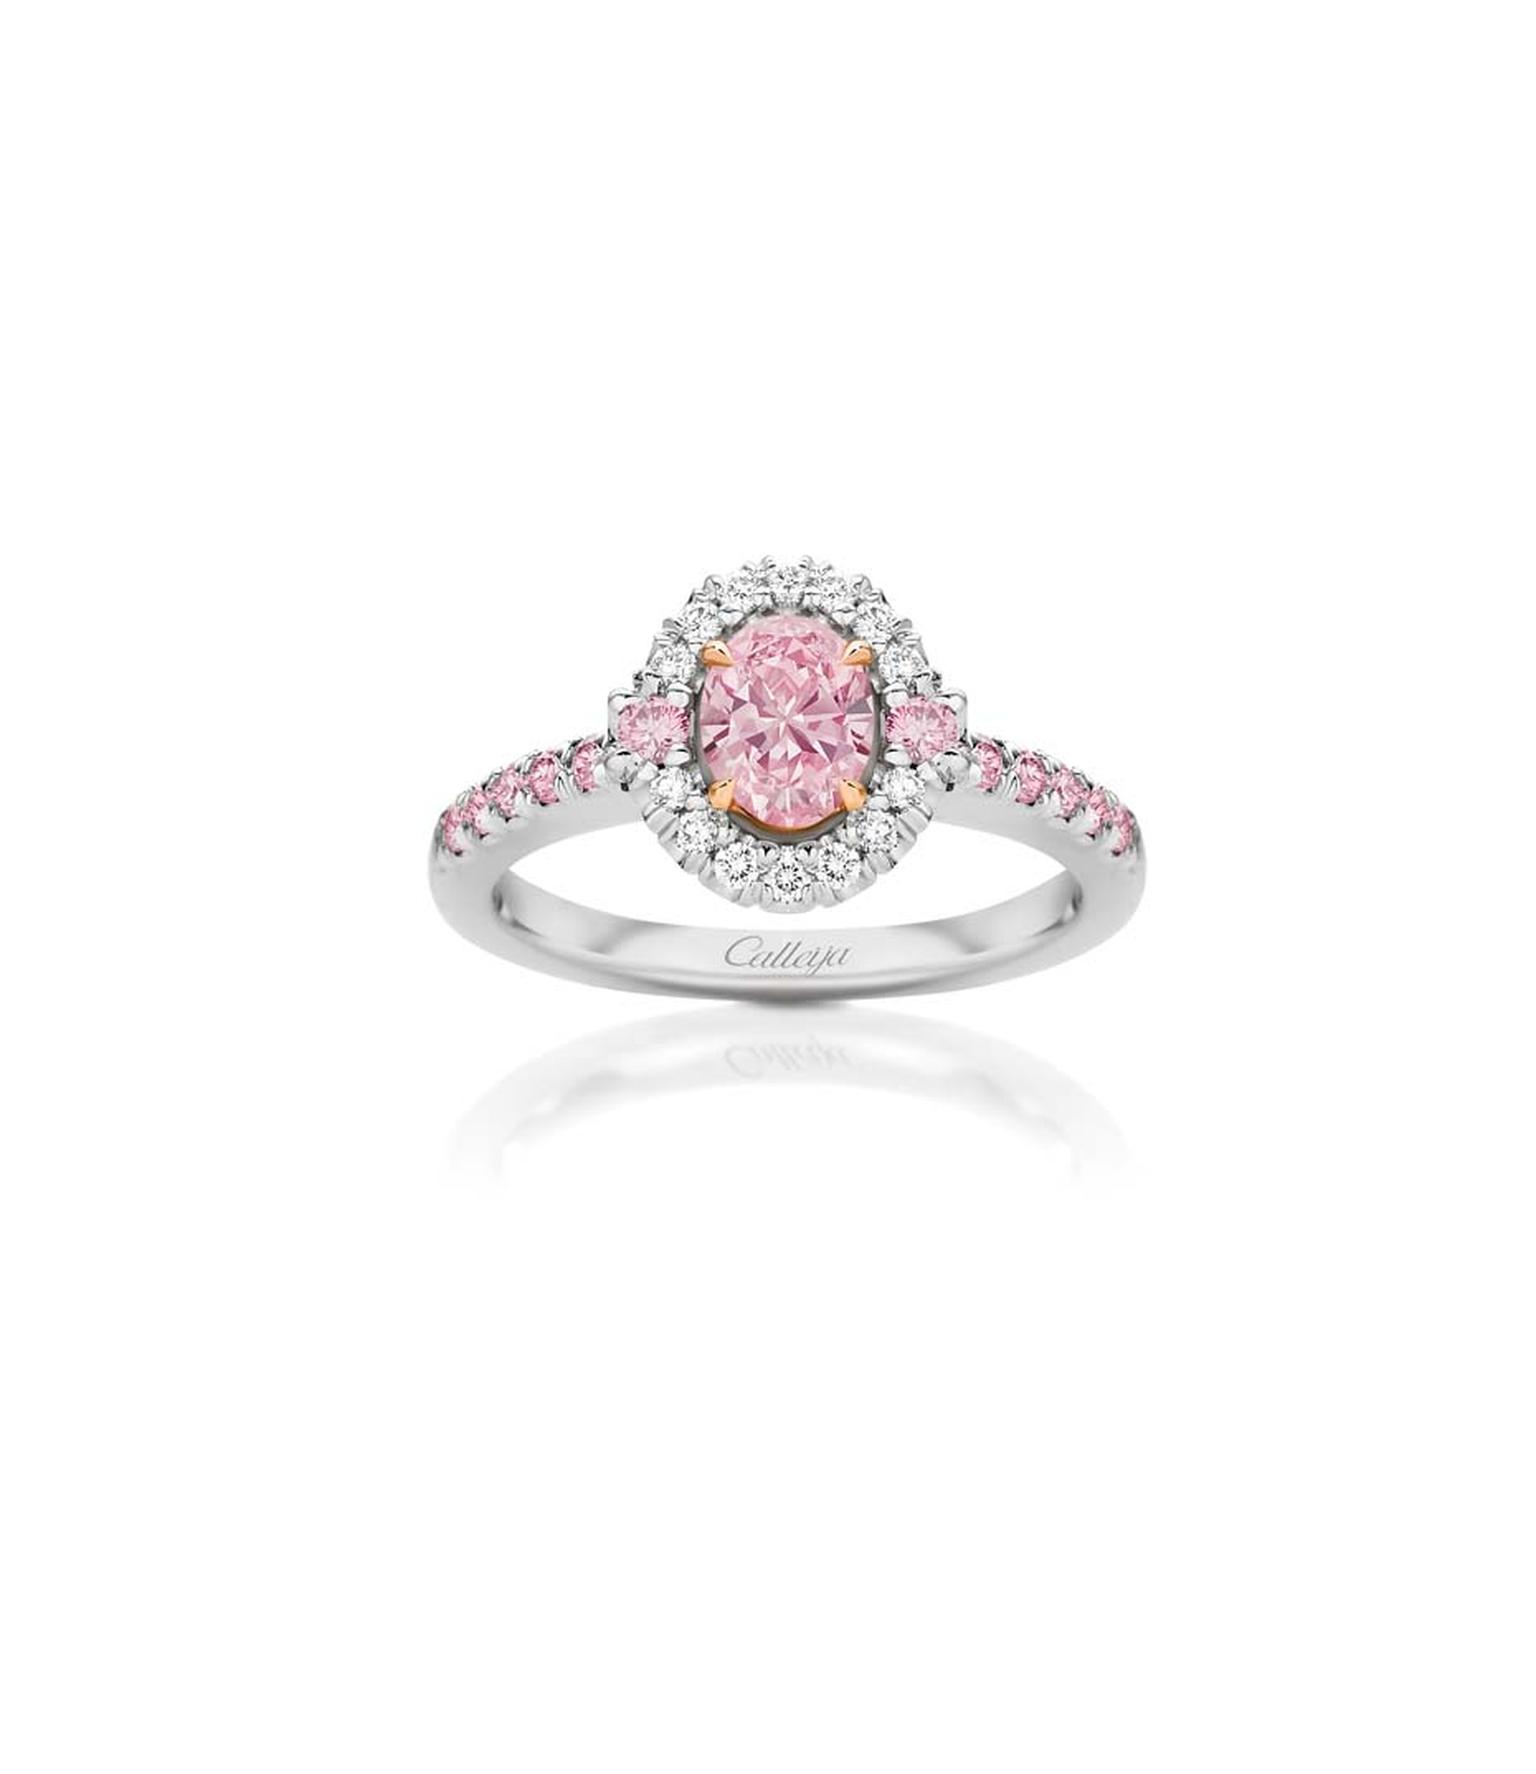 Callieja Elyssa Agyle brilliant-cut pink diamond ring surrounded by white and pink pavé diamonds.